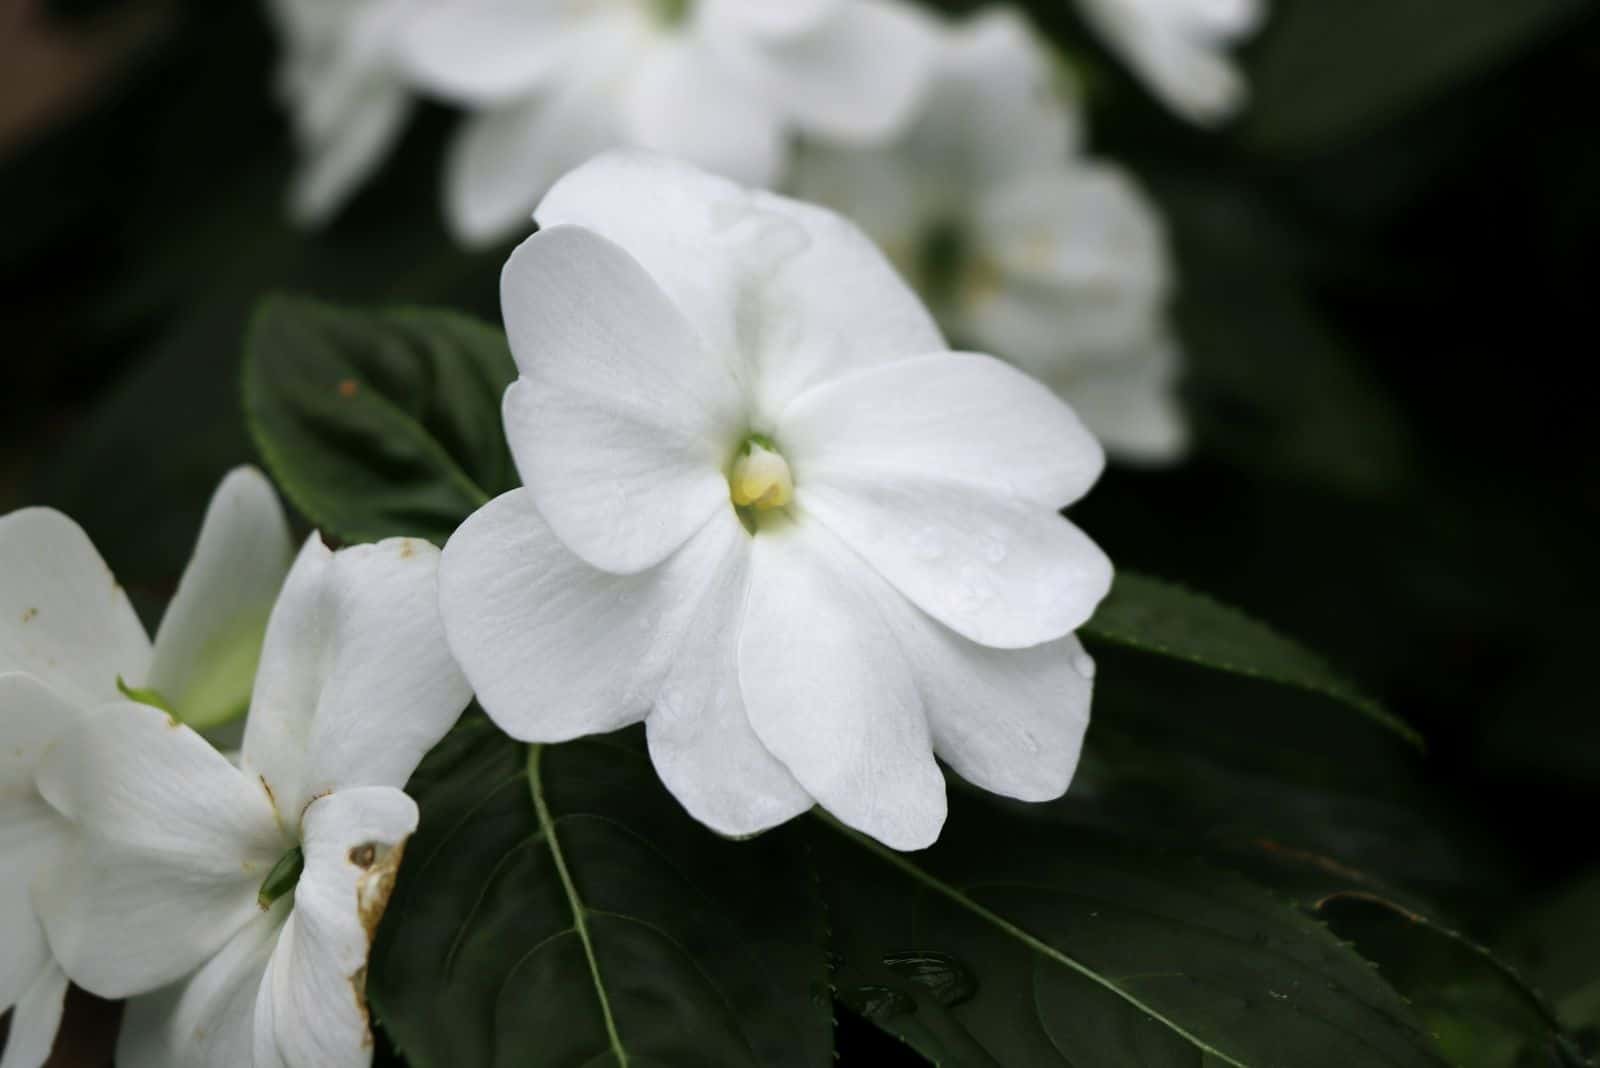 A white bloom of begonia in some park